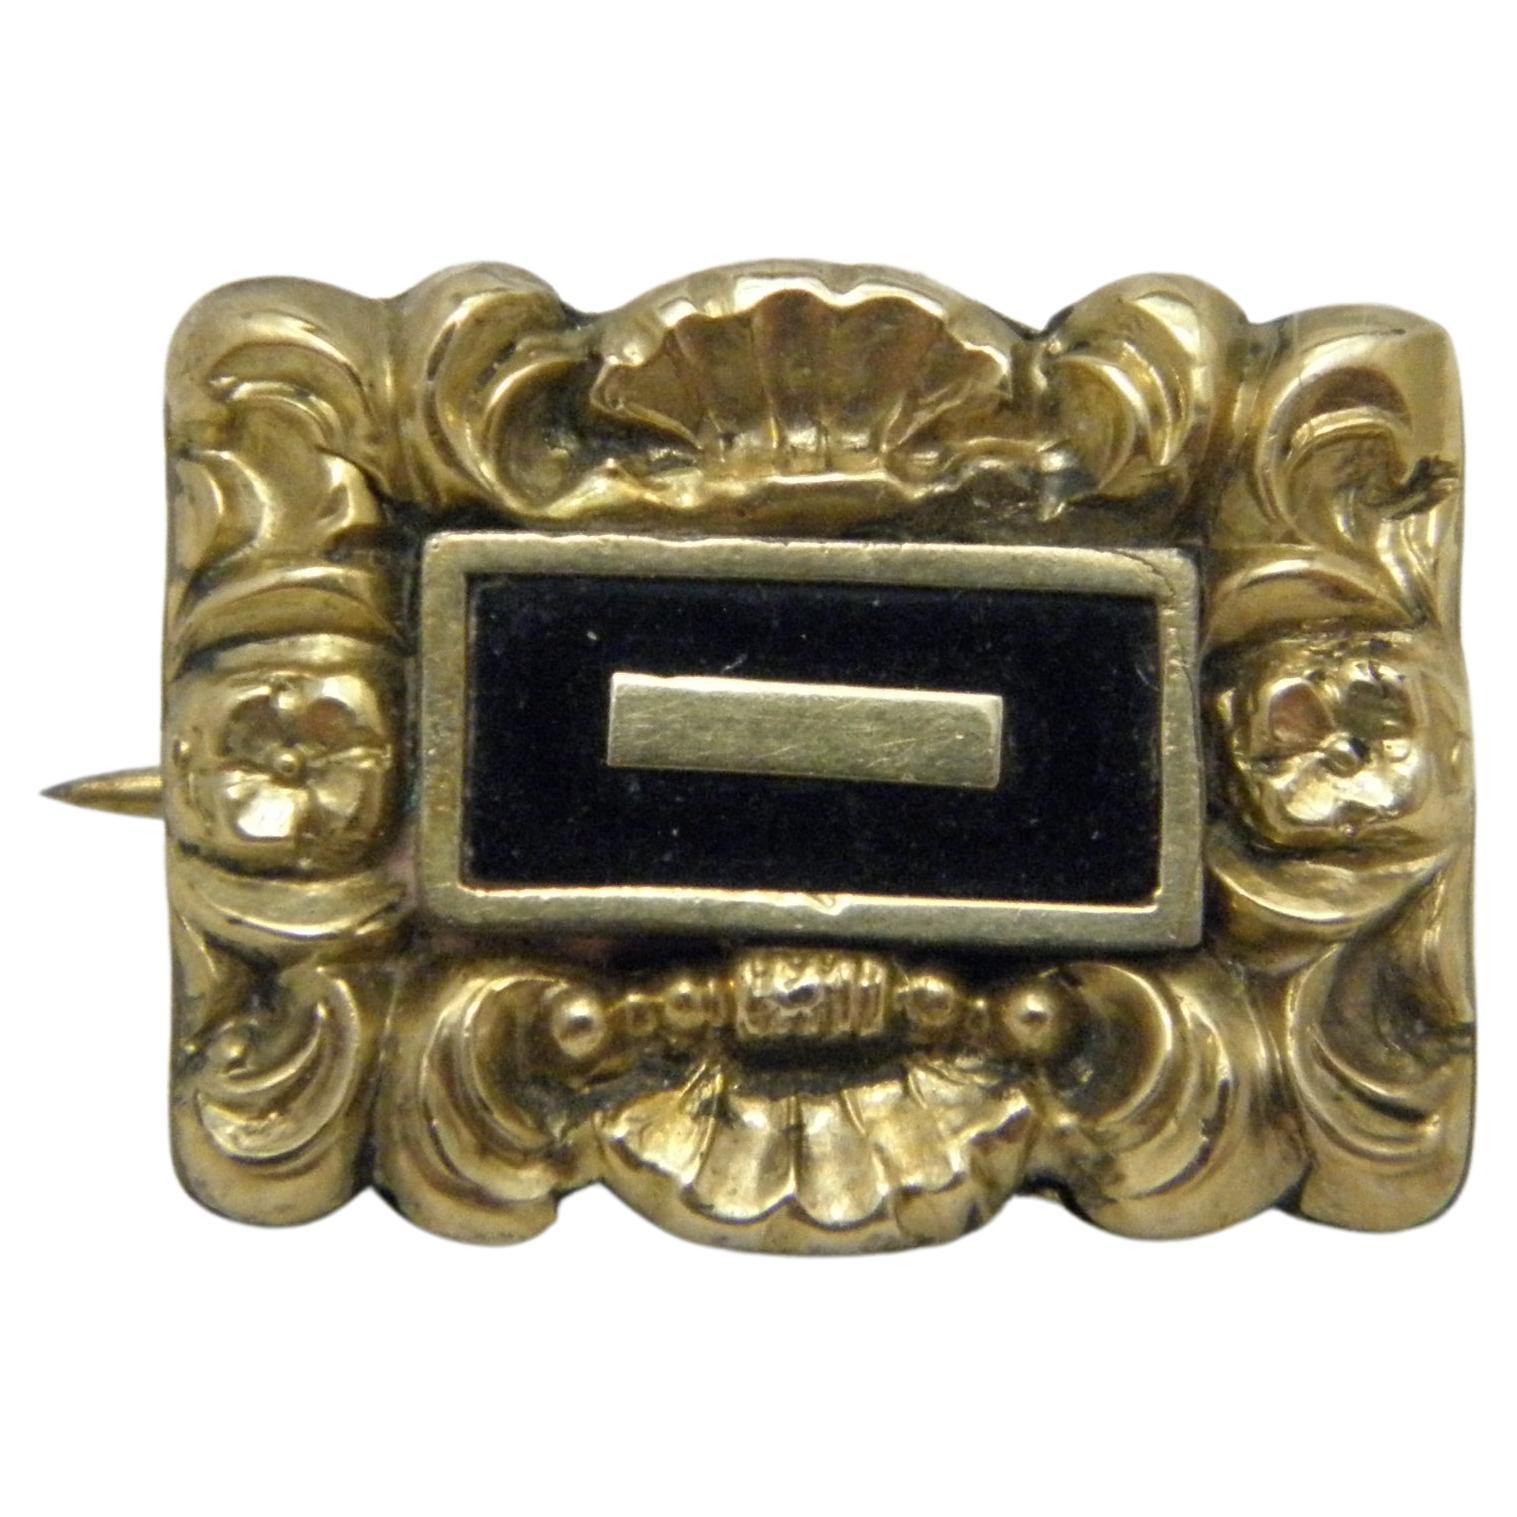 Antique 18ct Gold Enamel Mourning Brooch Pin c1850 750 Purity Detailed